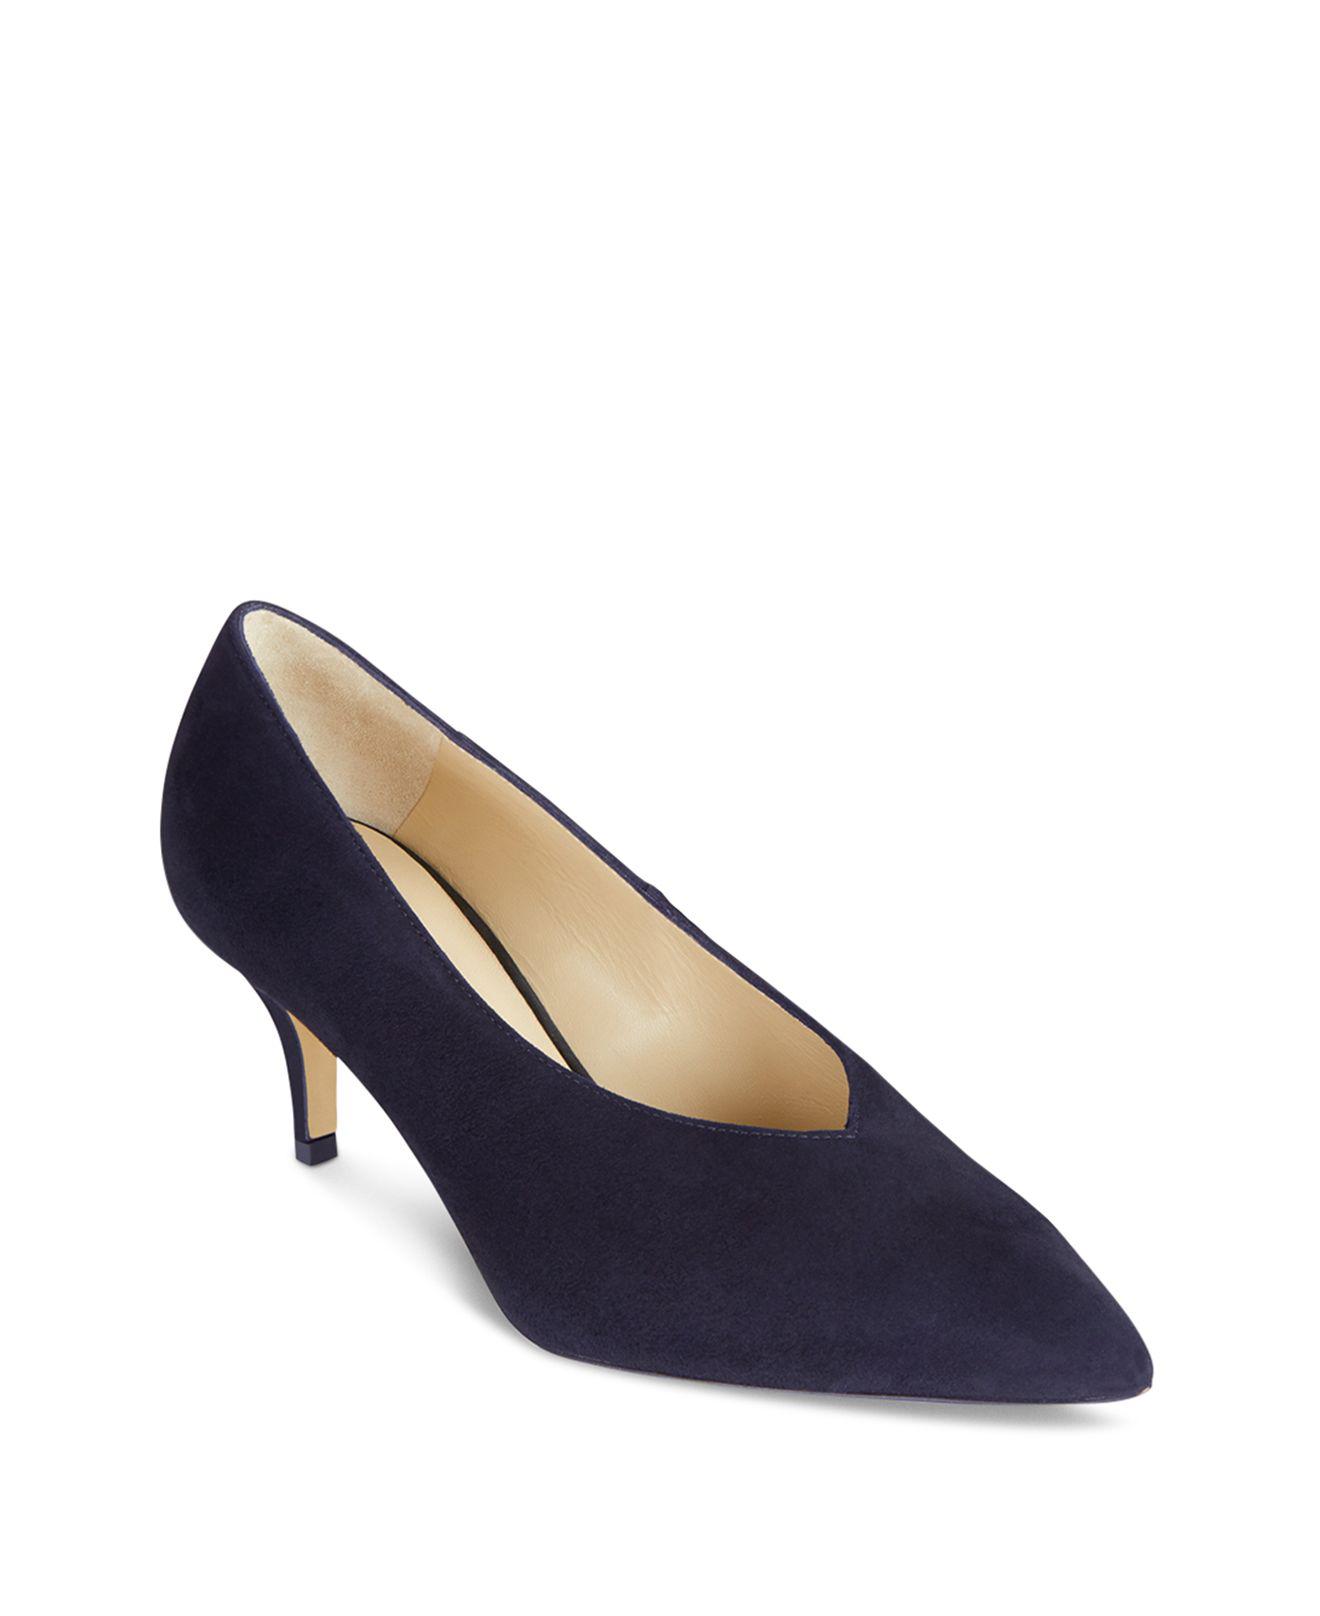 Lyst - Hobbs Women's Penelope Suede Pointed Toe Court Pumps in Blue